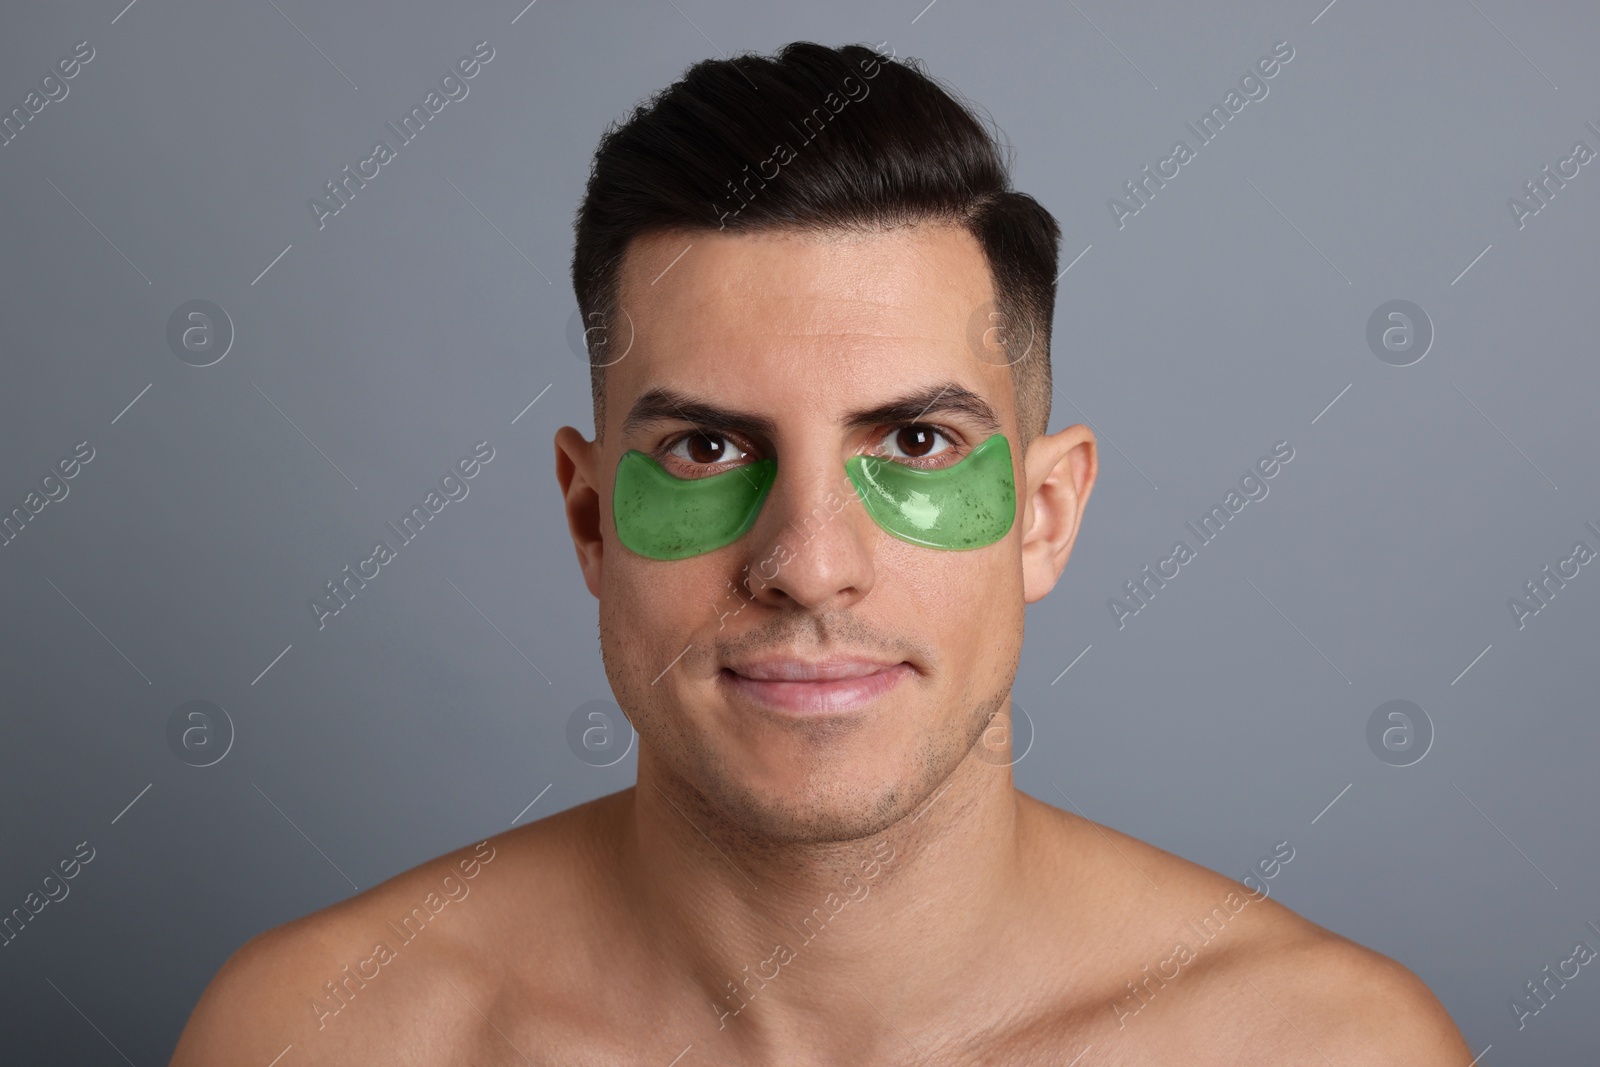 Photo of Man with green under eye patches on grey background